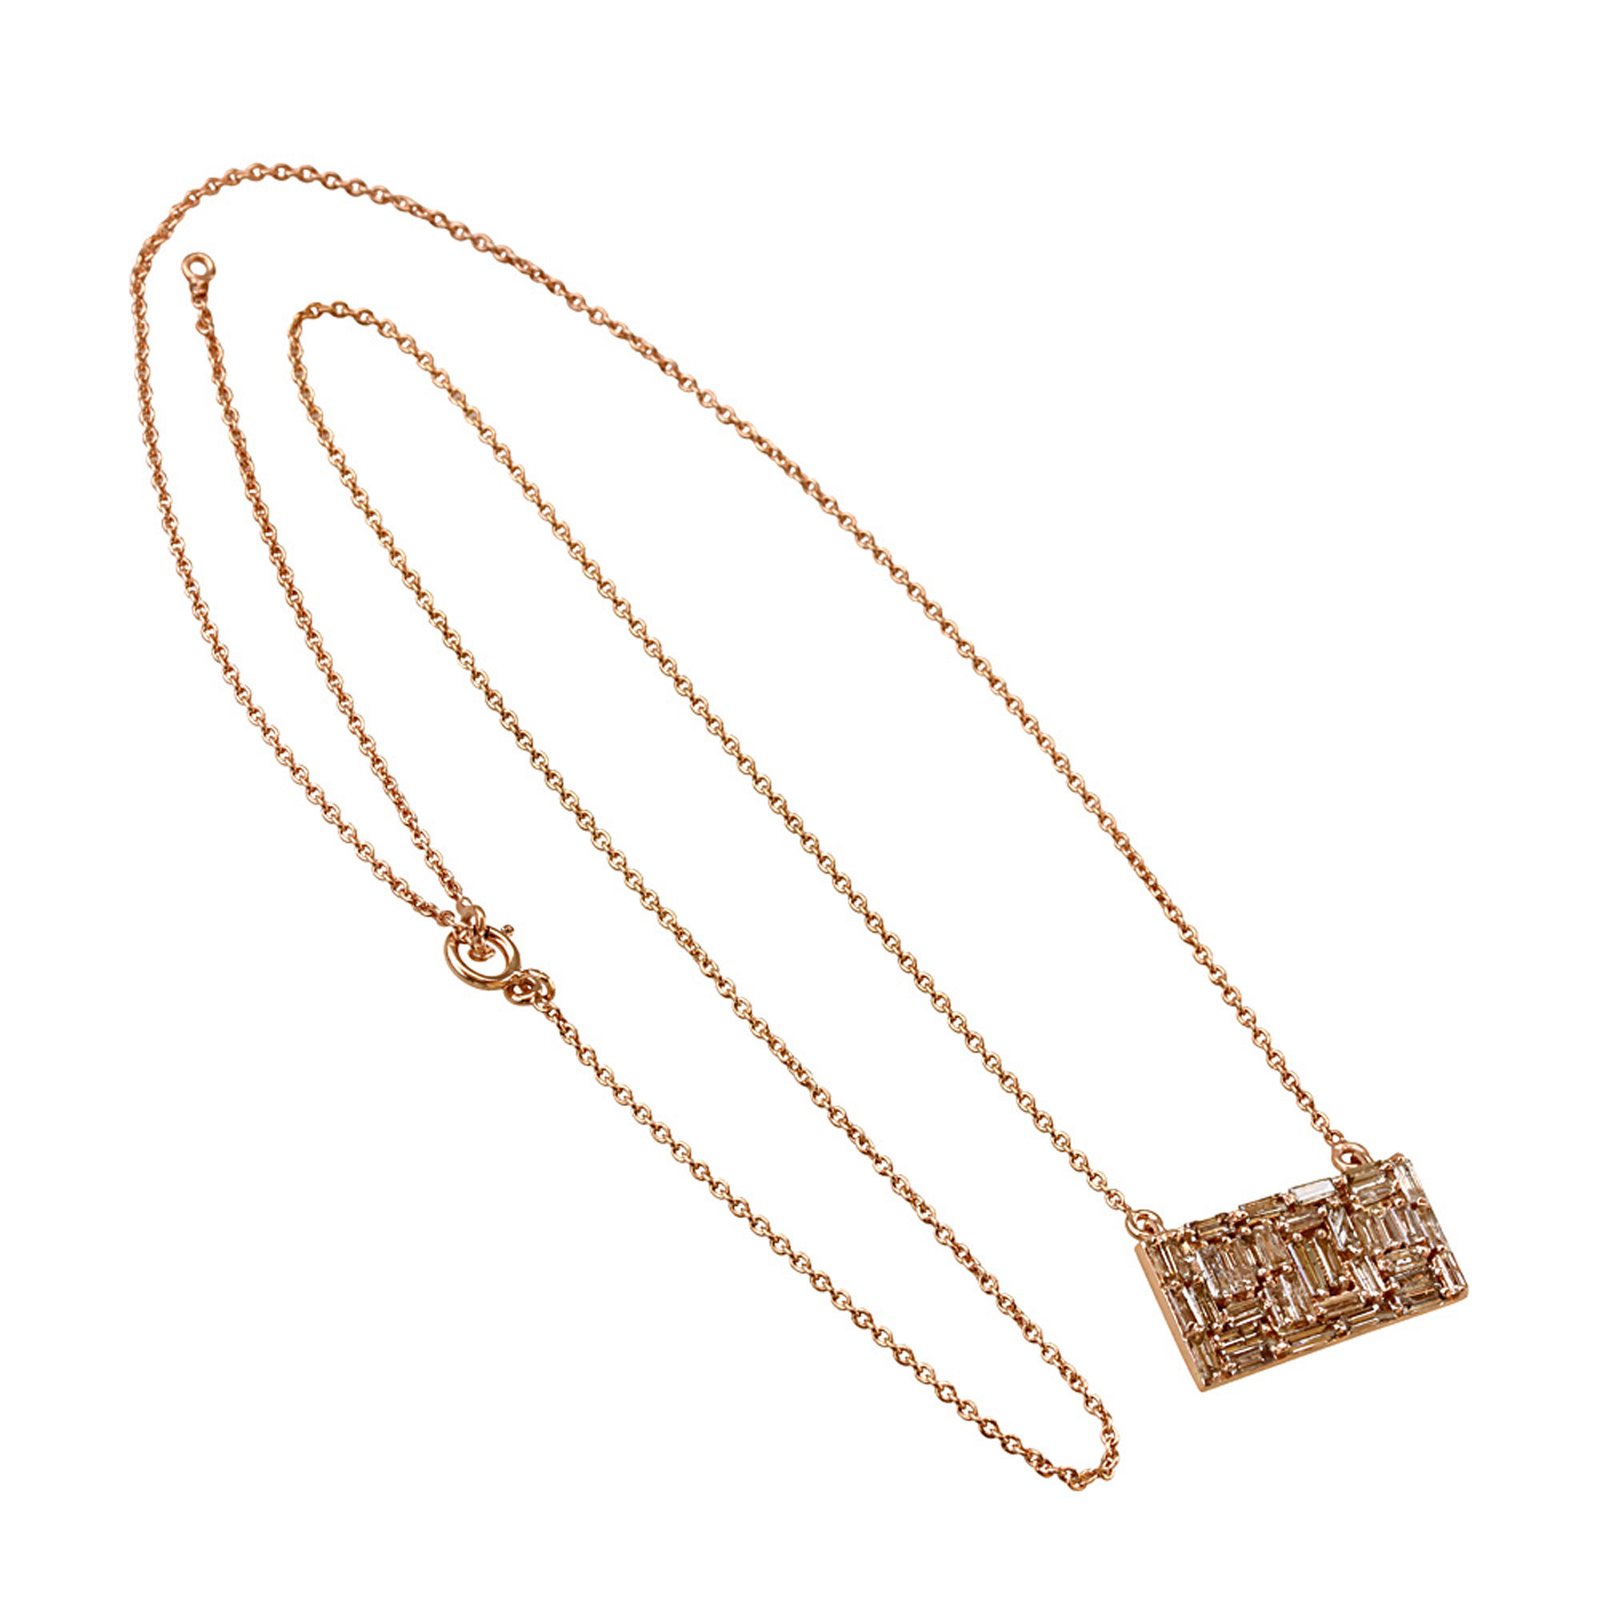 18k Solid gold baguette diamond pendant necklace with chain